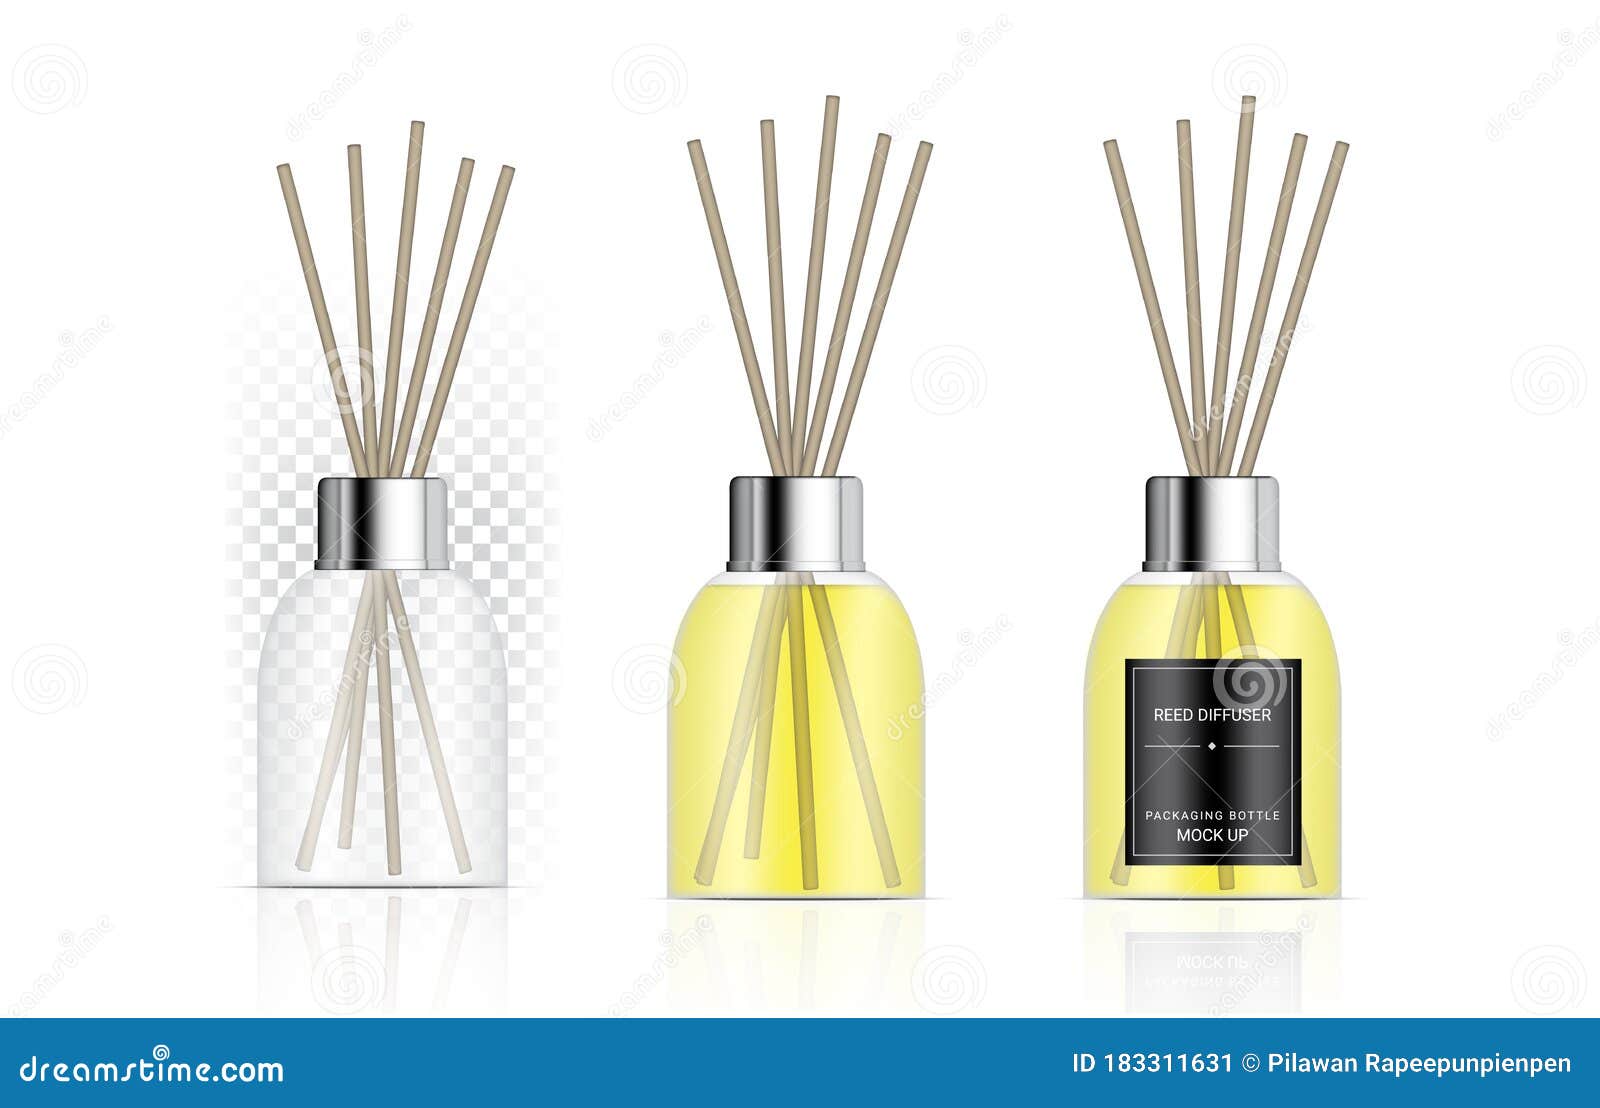 Download Mock Up Glossy Transparent Reed Diffuser Bottle With Perfume Oil Product Branding Advertising ...